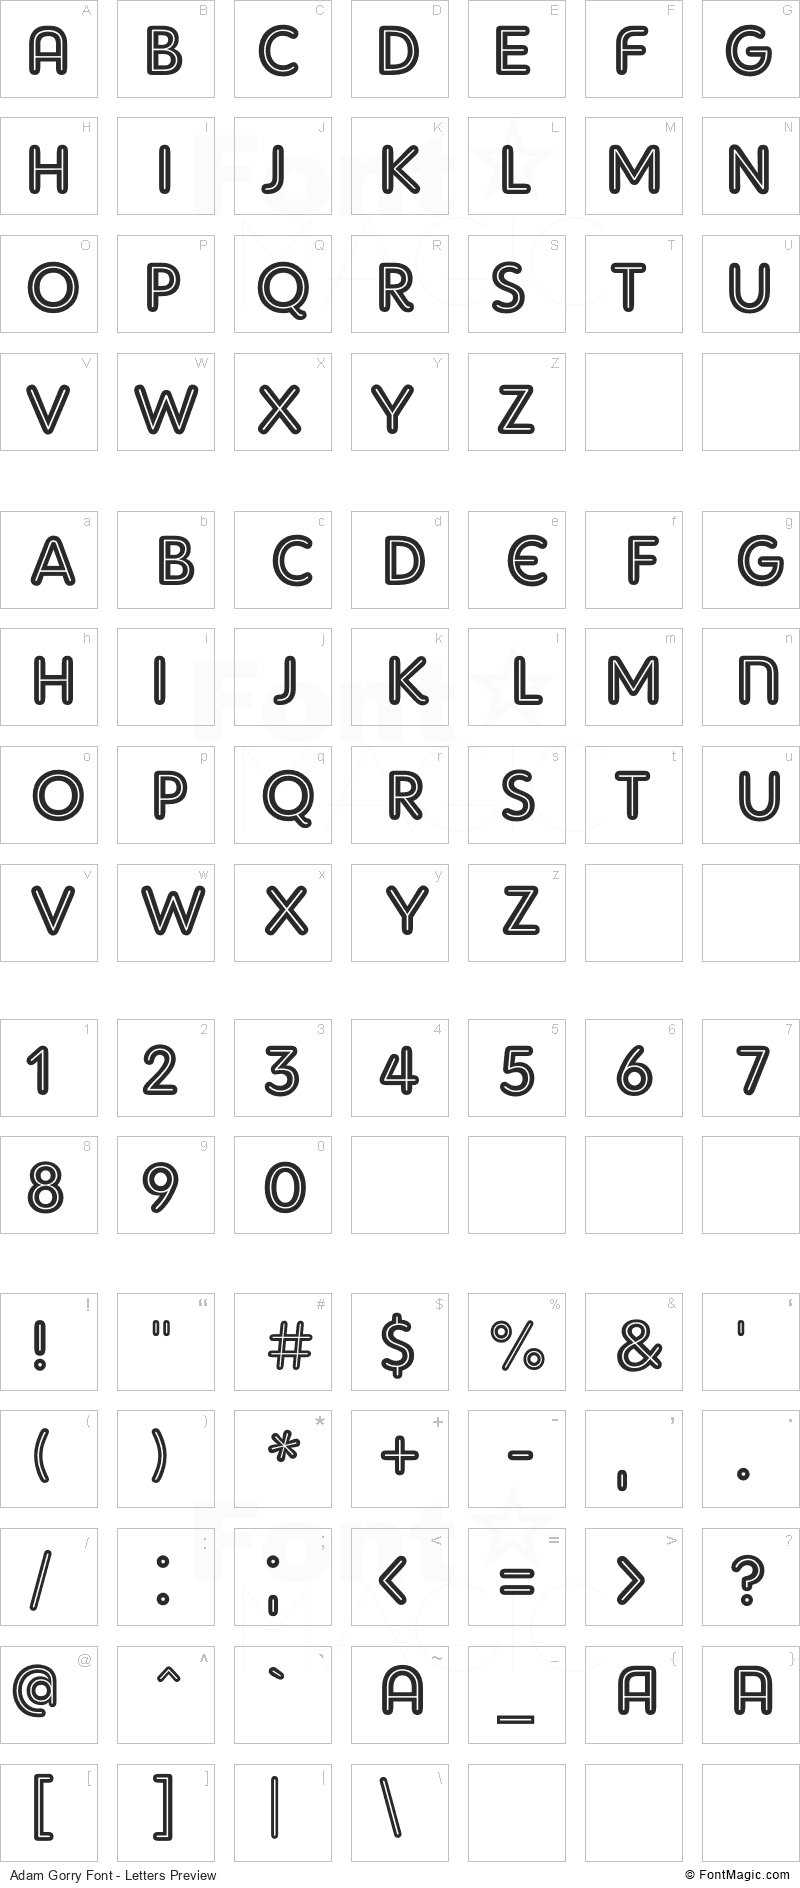 Adam Gorry Font - All Latters Preview Chart